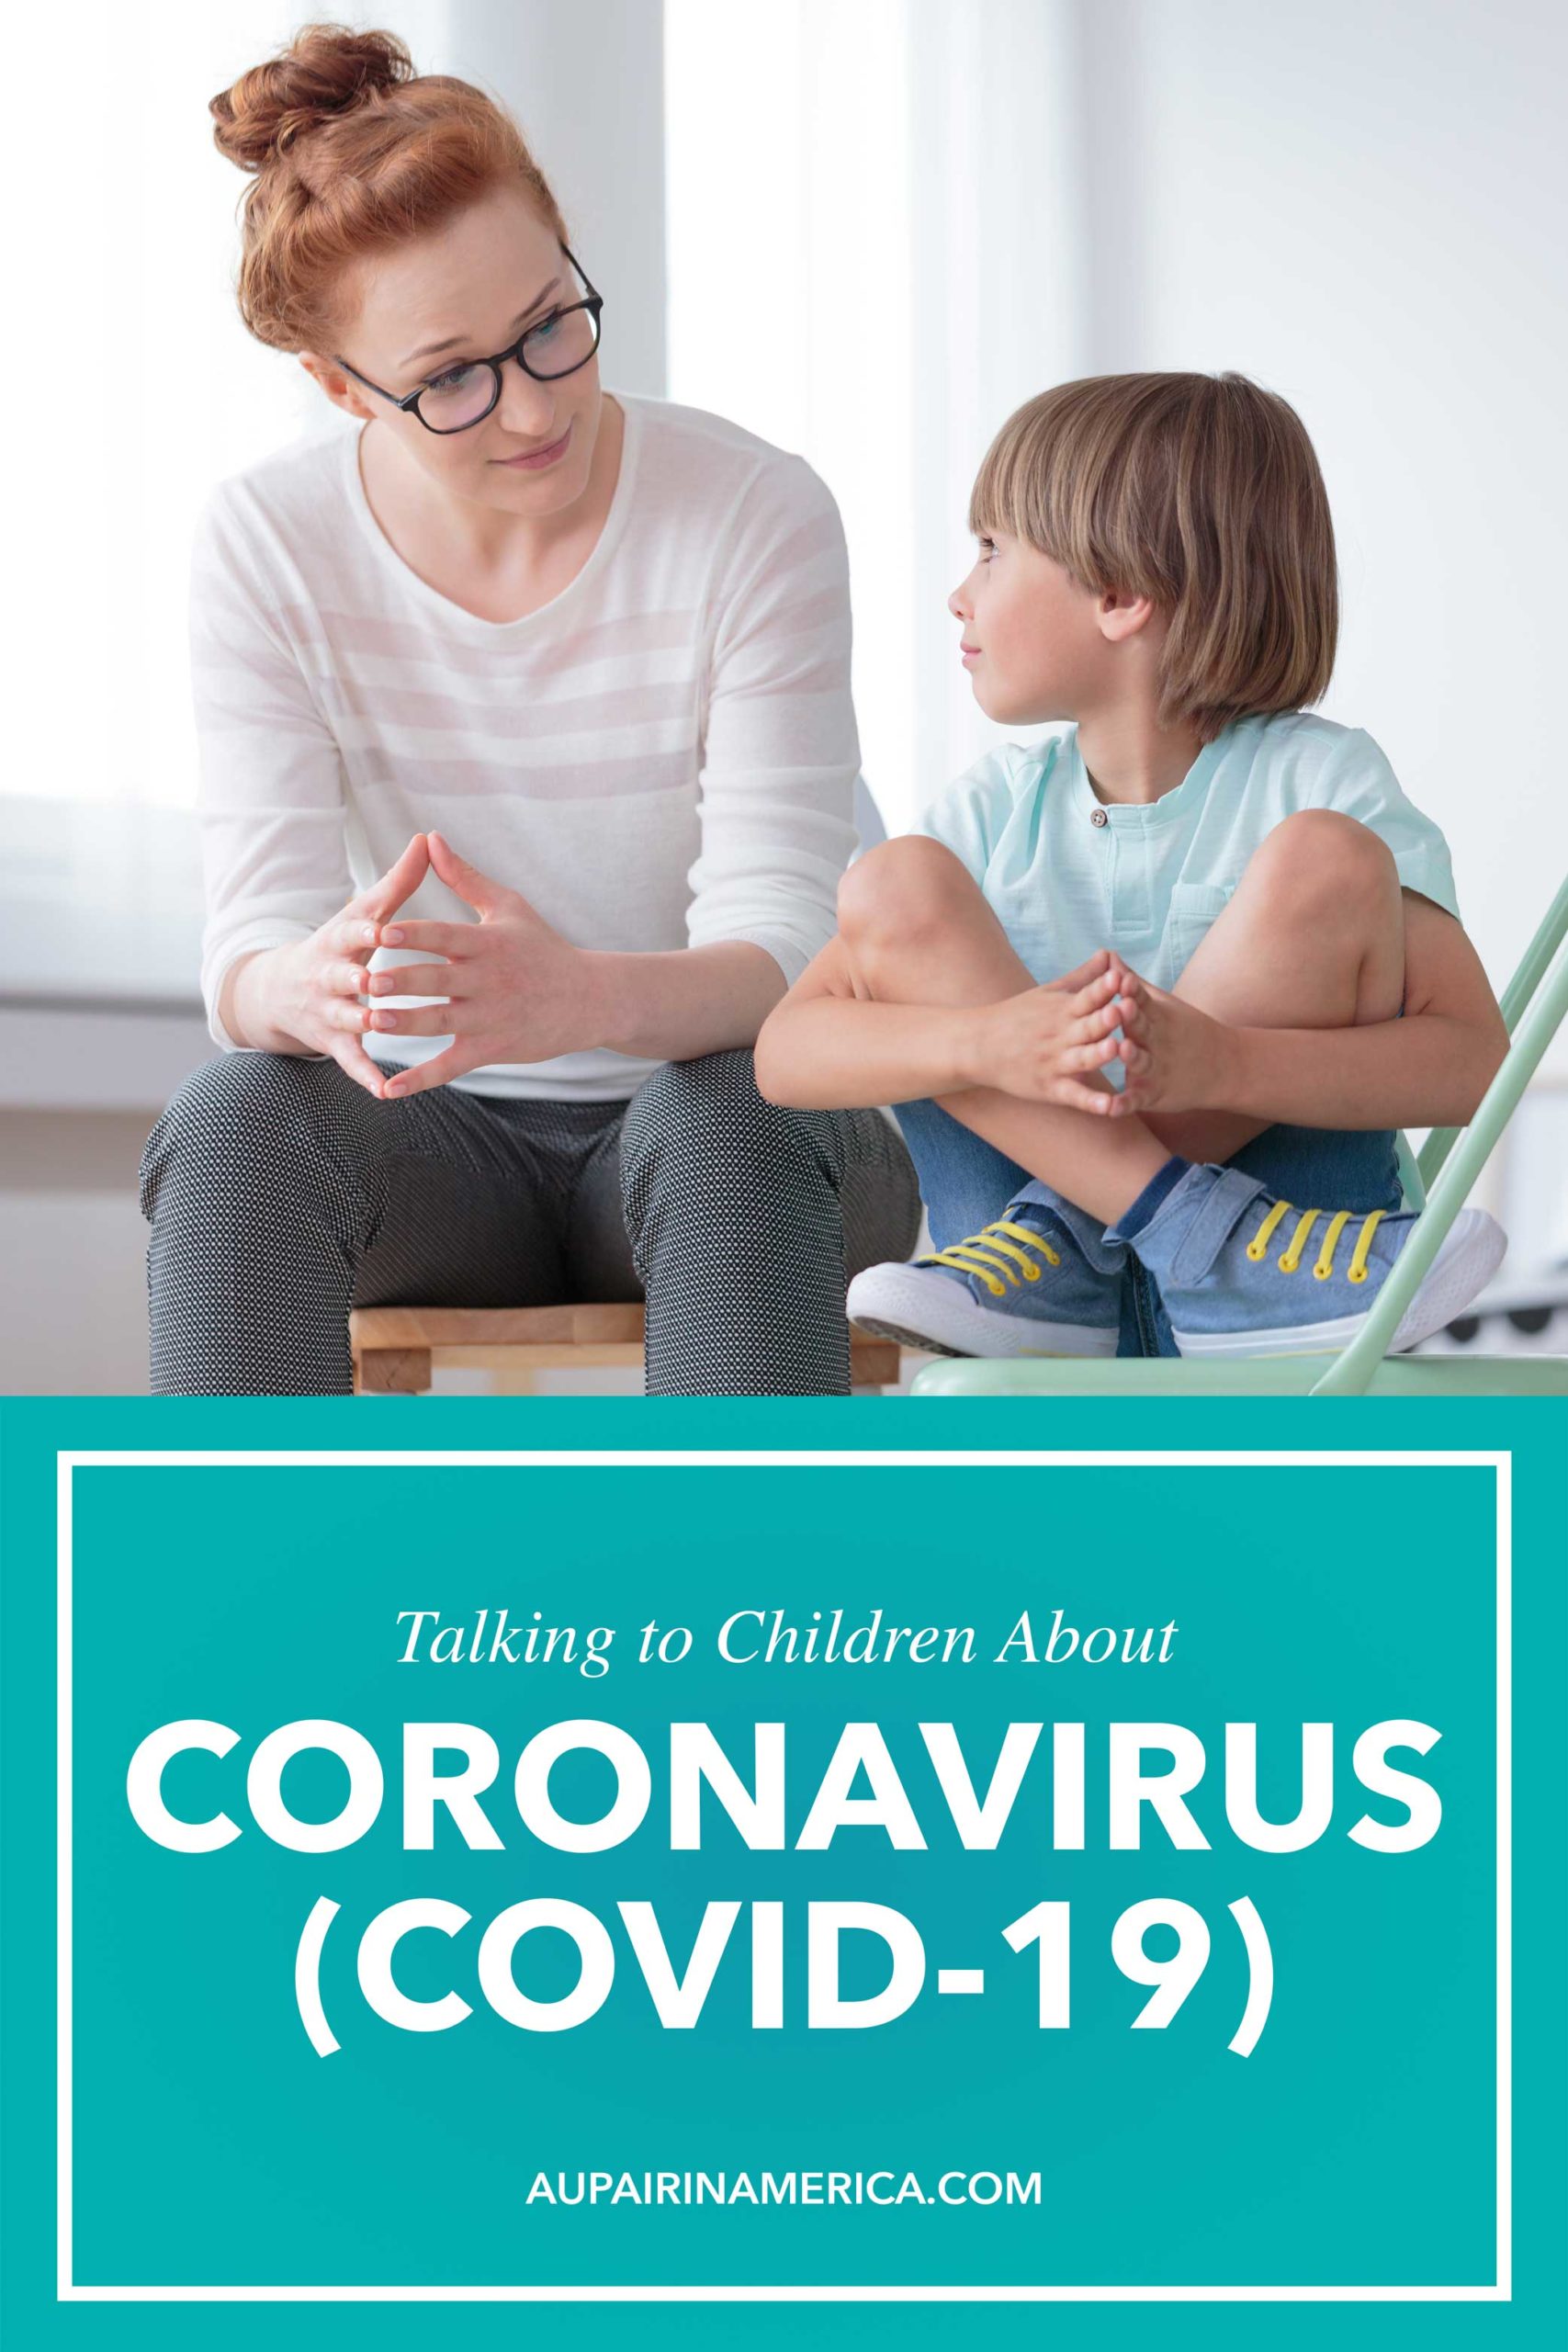 Learn tips for how to talk to children about Coronavirus (COVID-19)